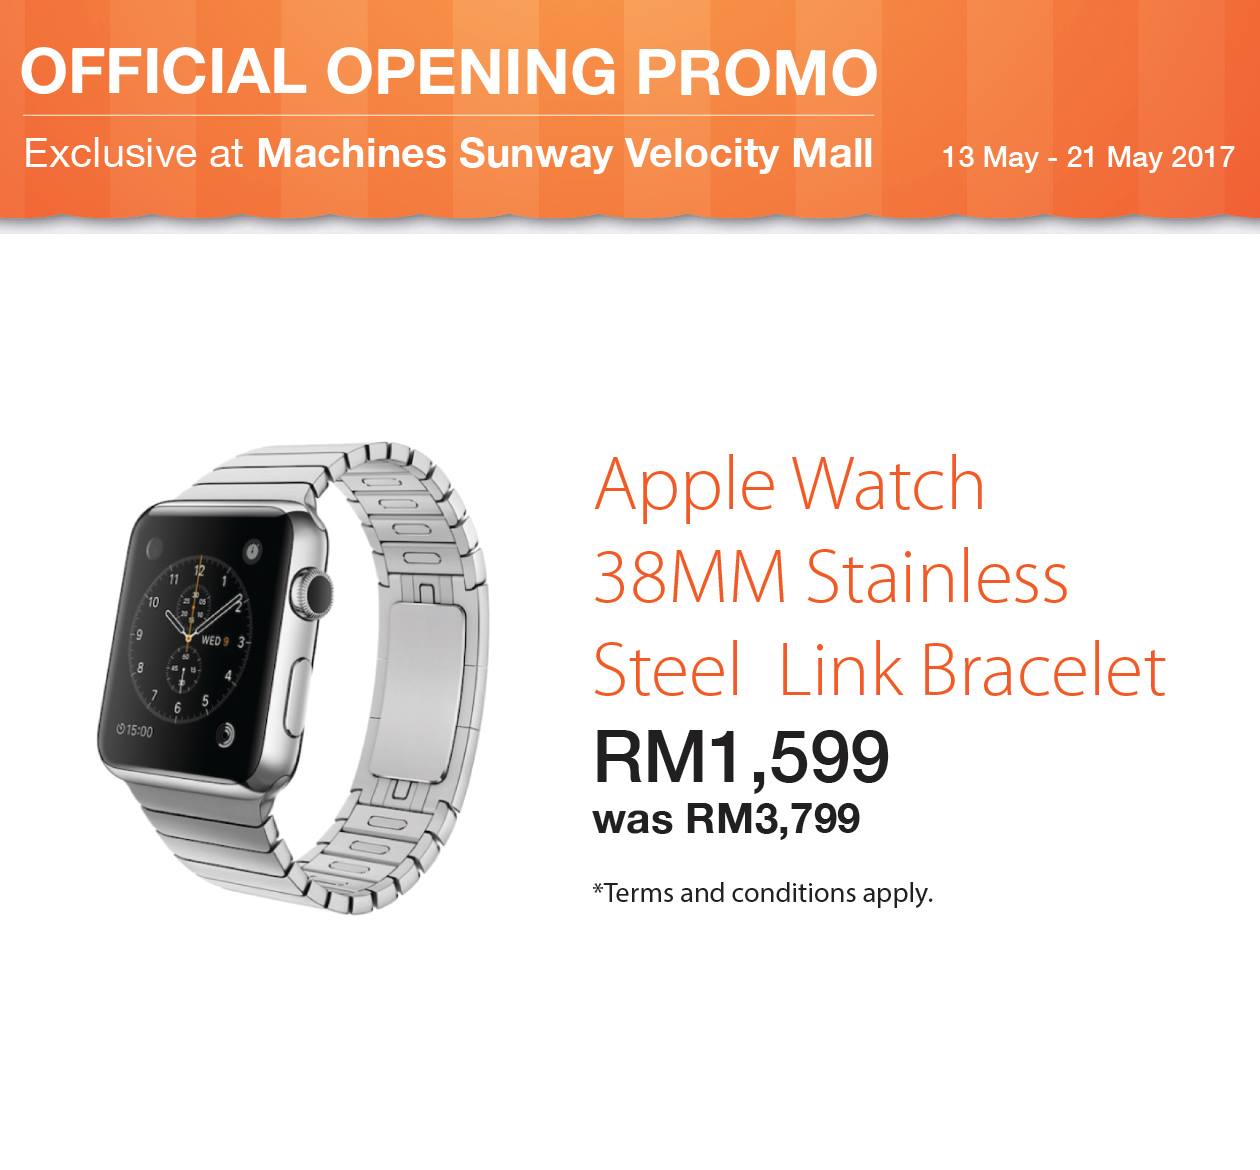 Apple iPhone 5s 16GB RM999, Apple Watch, Accessories 